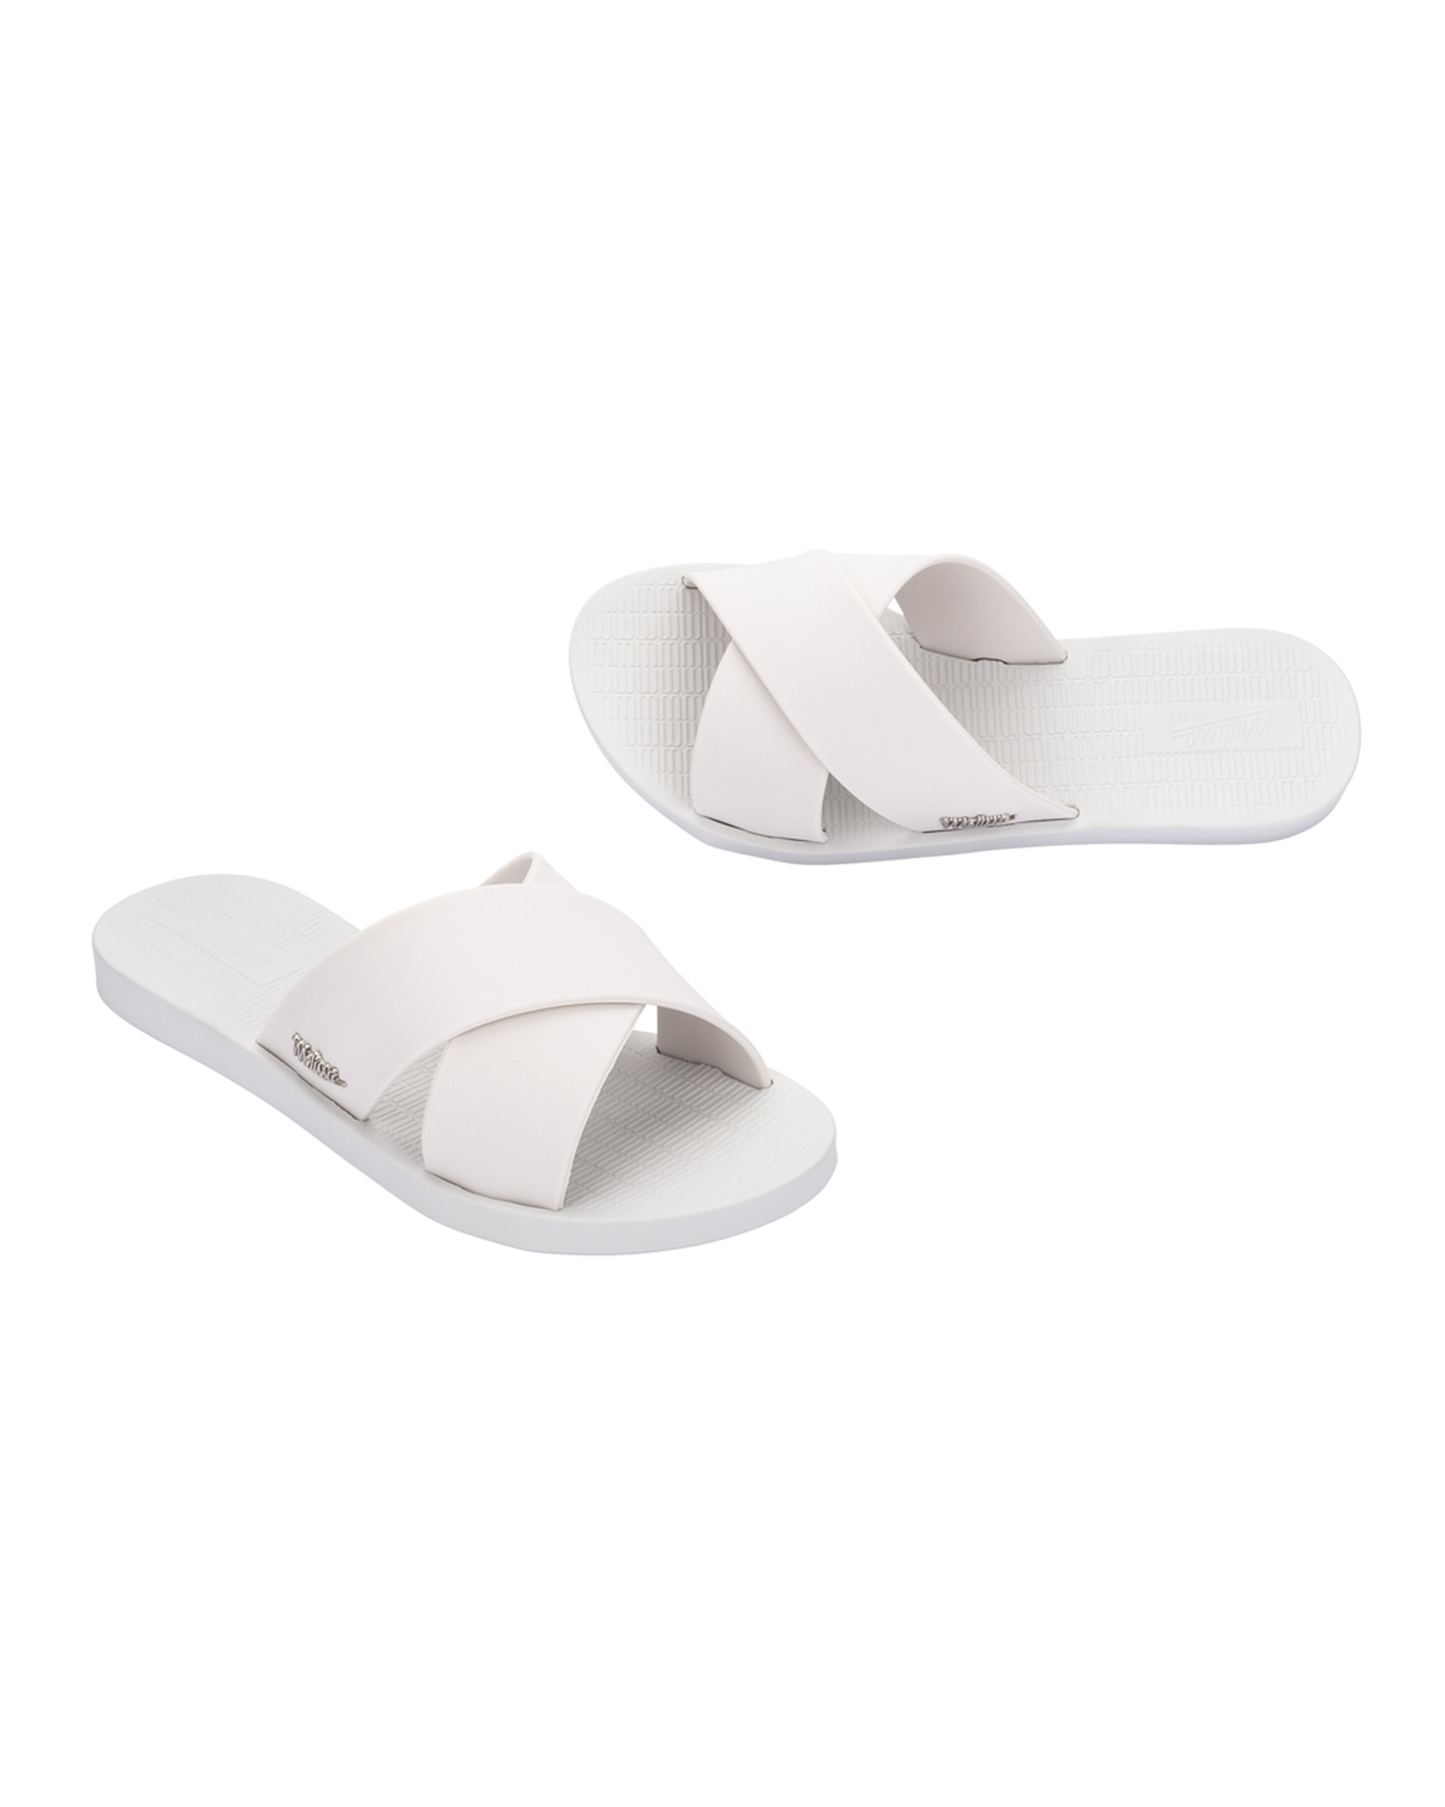 Melissa Sandals in White Color